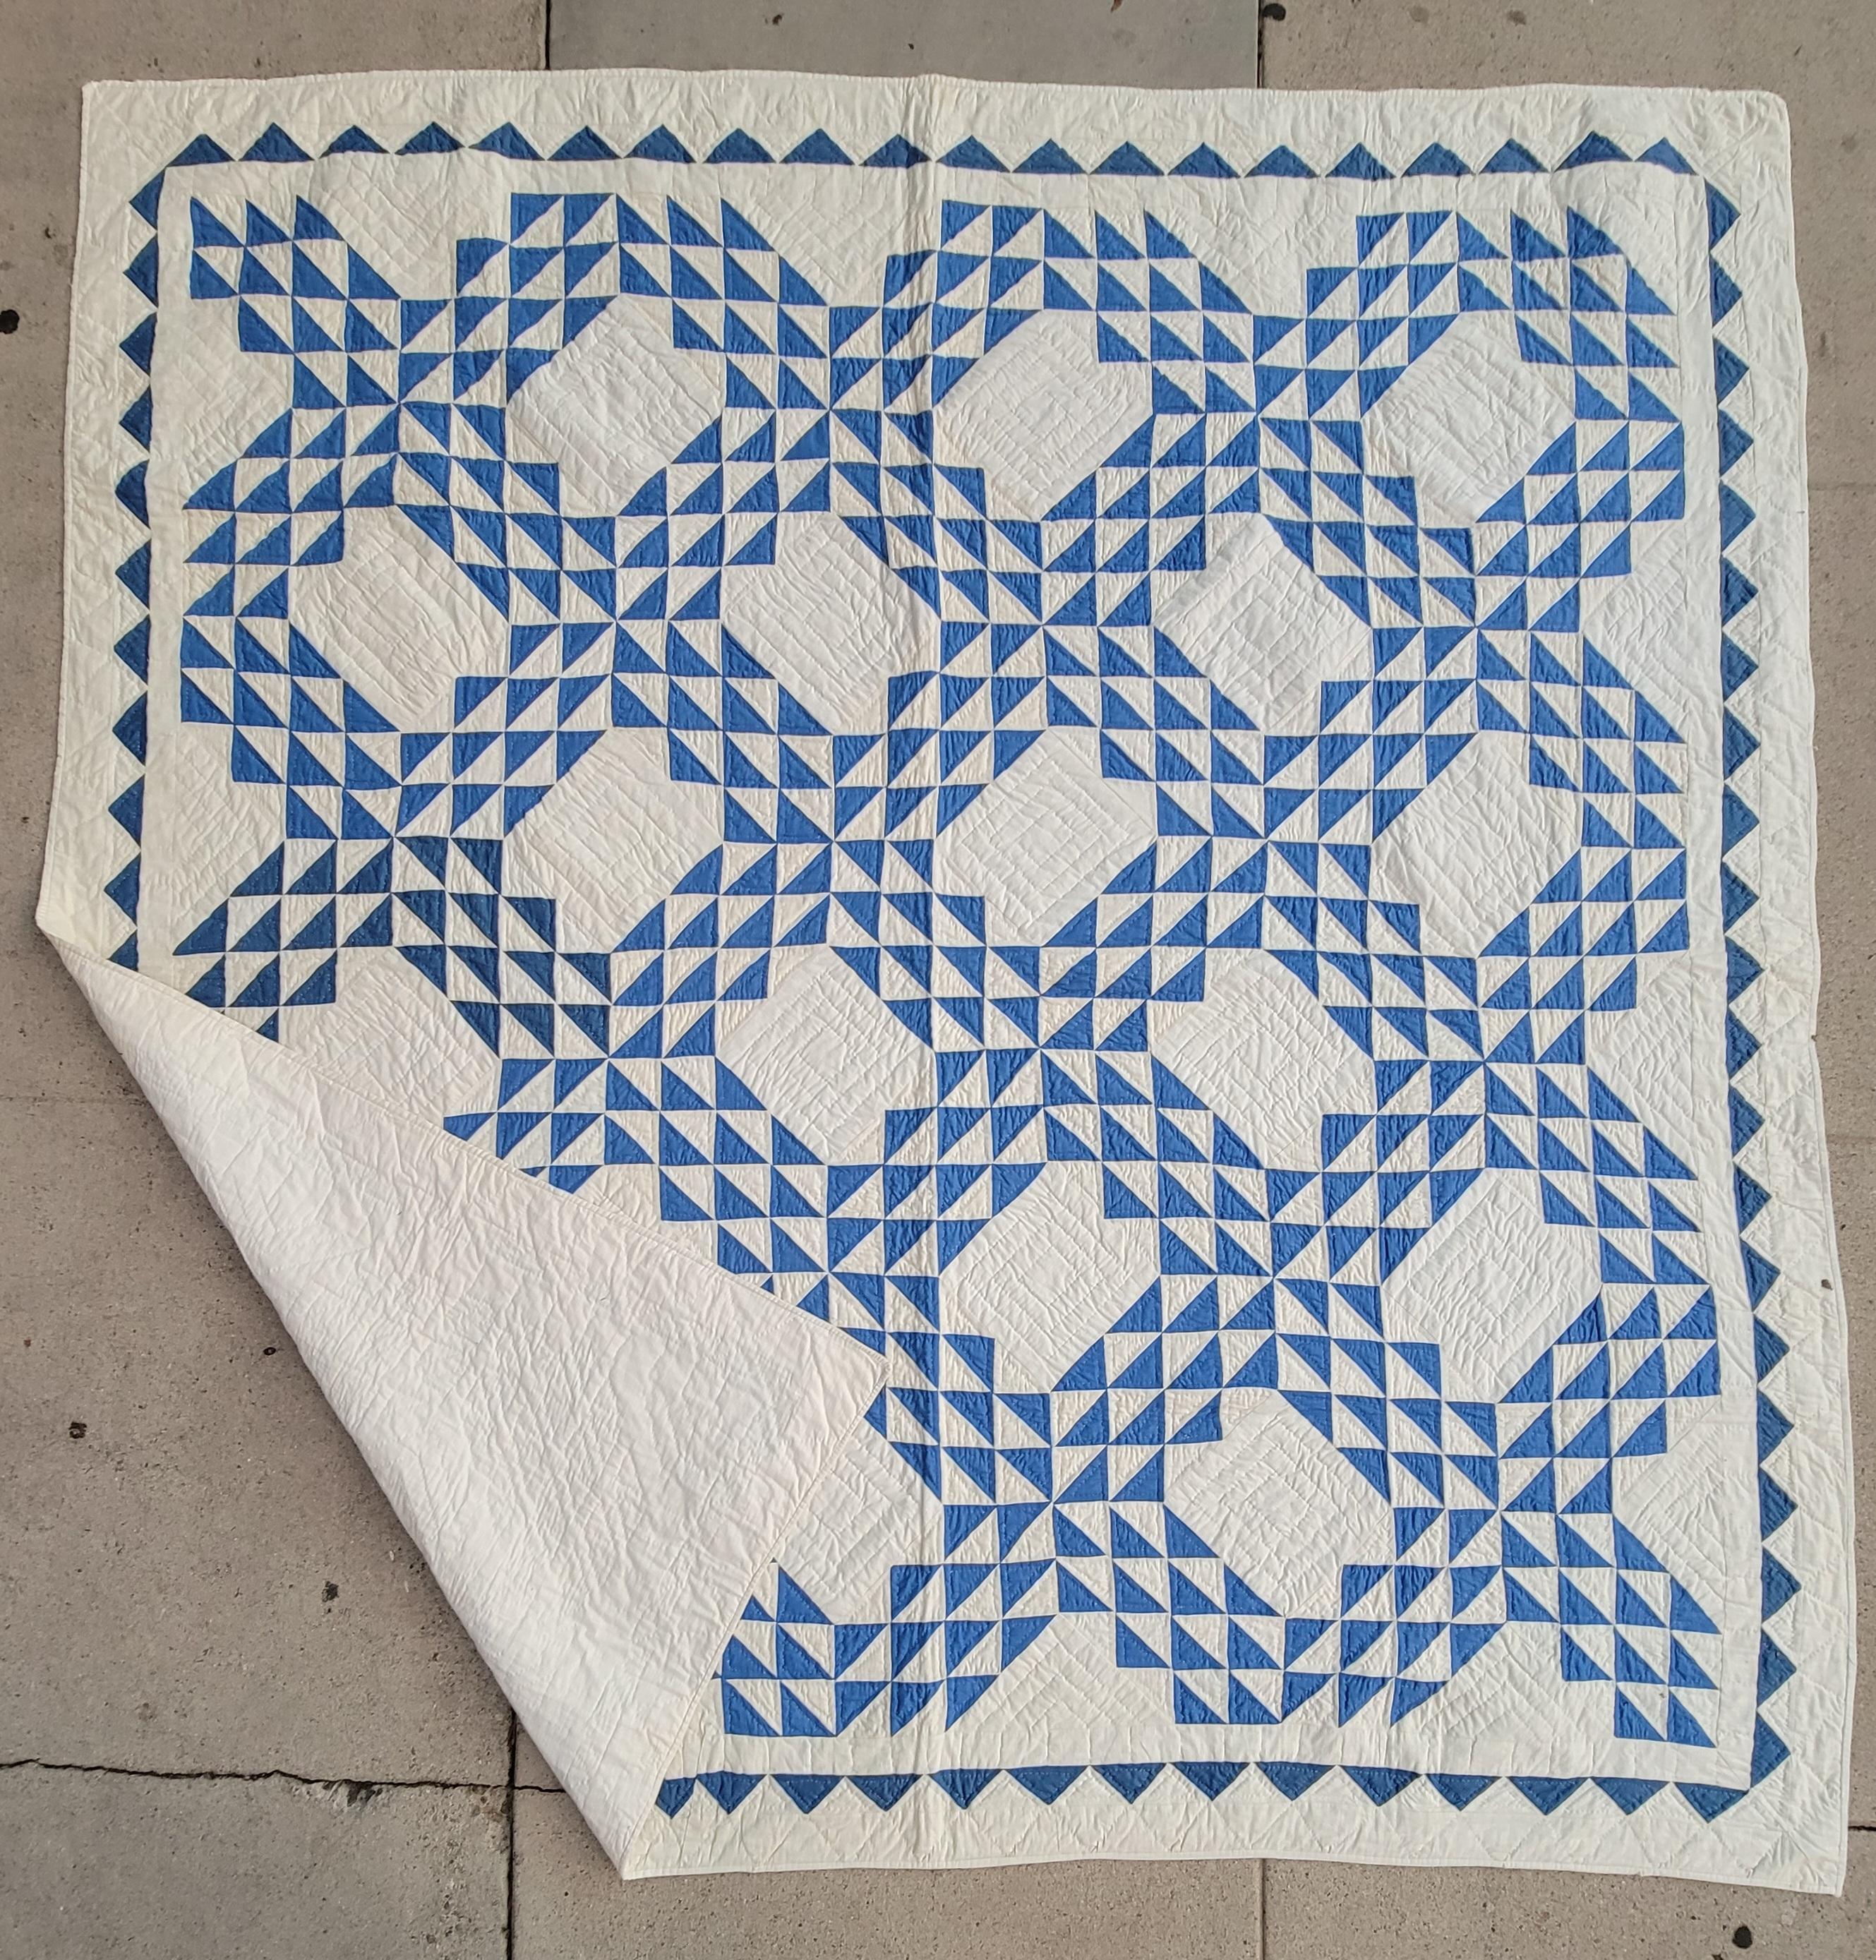 This fine small pieced robin egg blue & white ocean waves quilt is in pristine condition. It has fine quilting and a wonderful saw tooth inner border.